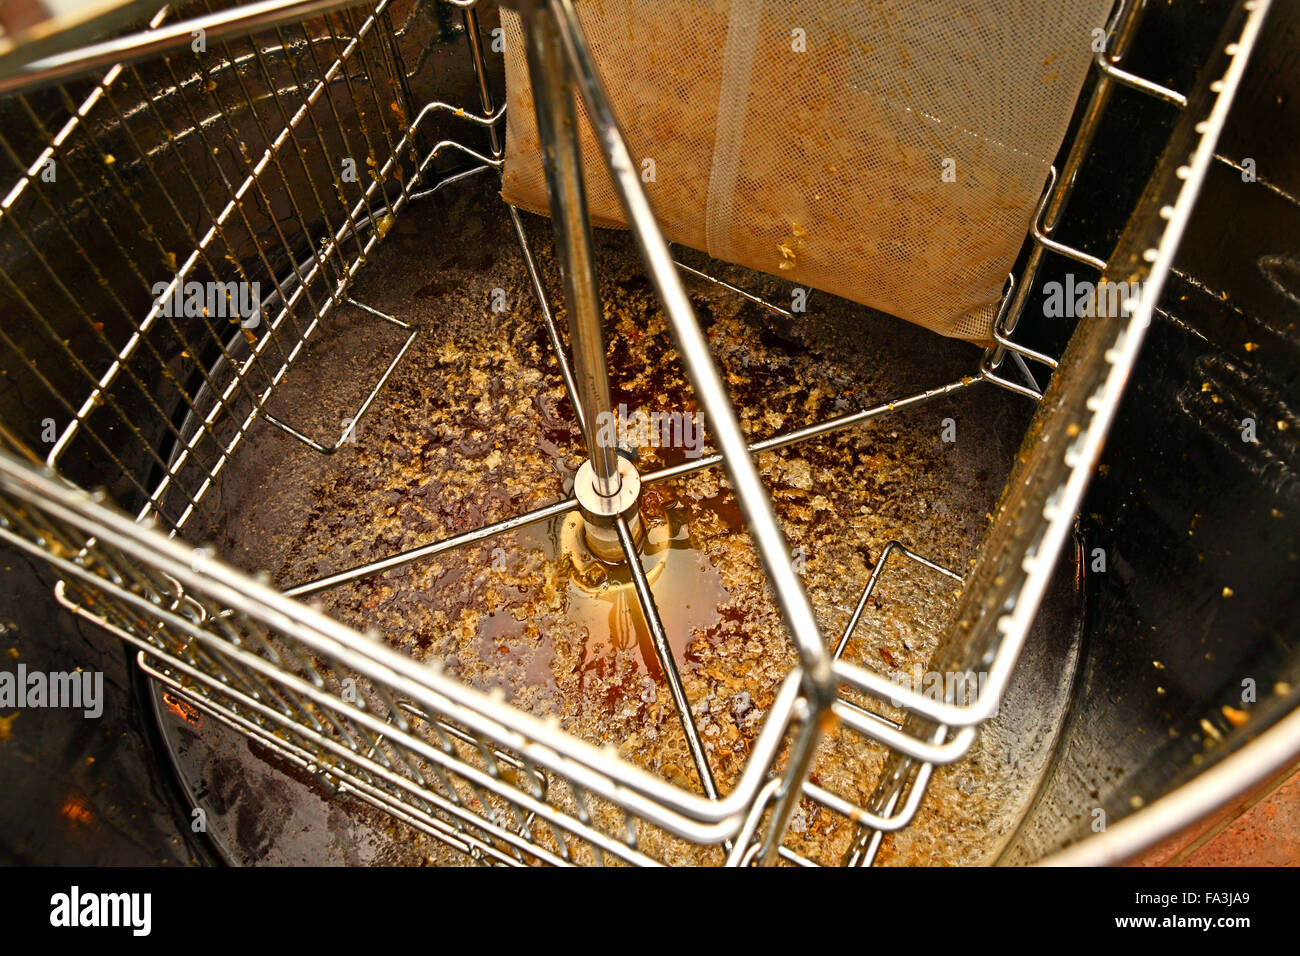 Honey in the bottom of an extractor after it has spun the honey out of the frames Stock Photo